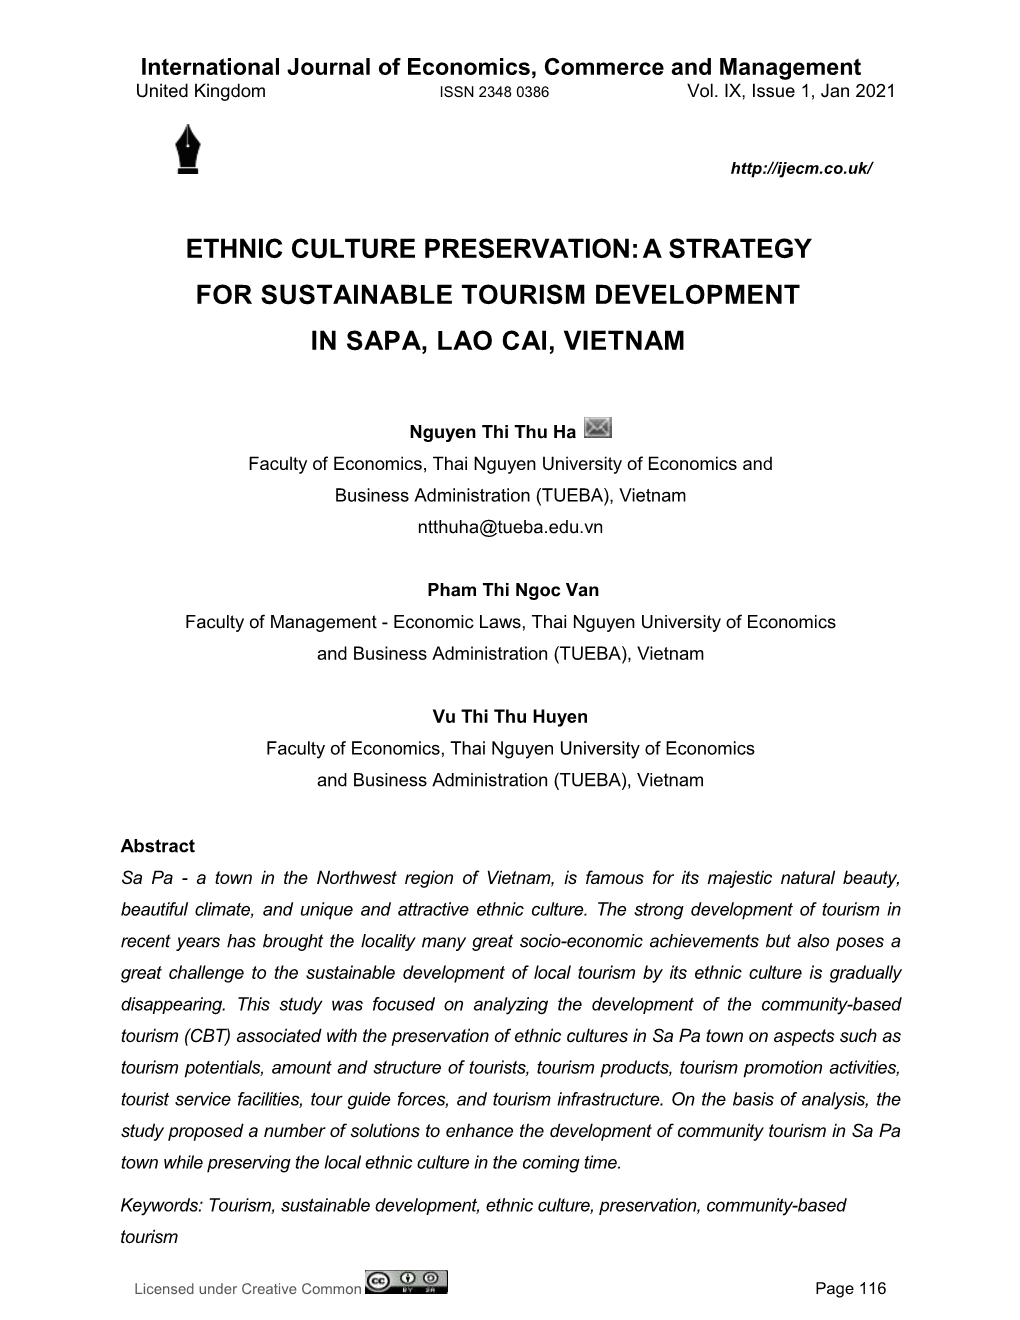 A Strategy for Sustainable Tourism Development in Sapa, Lao Cai, Vietnam